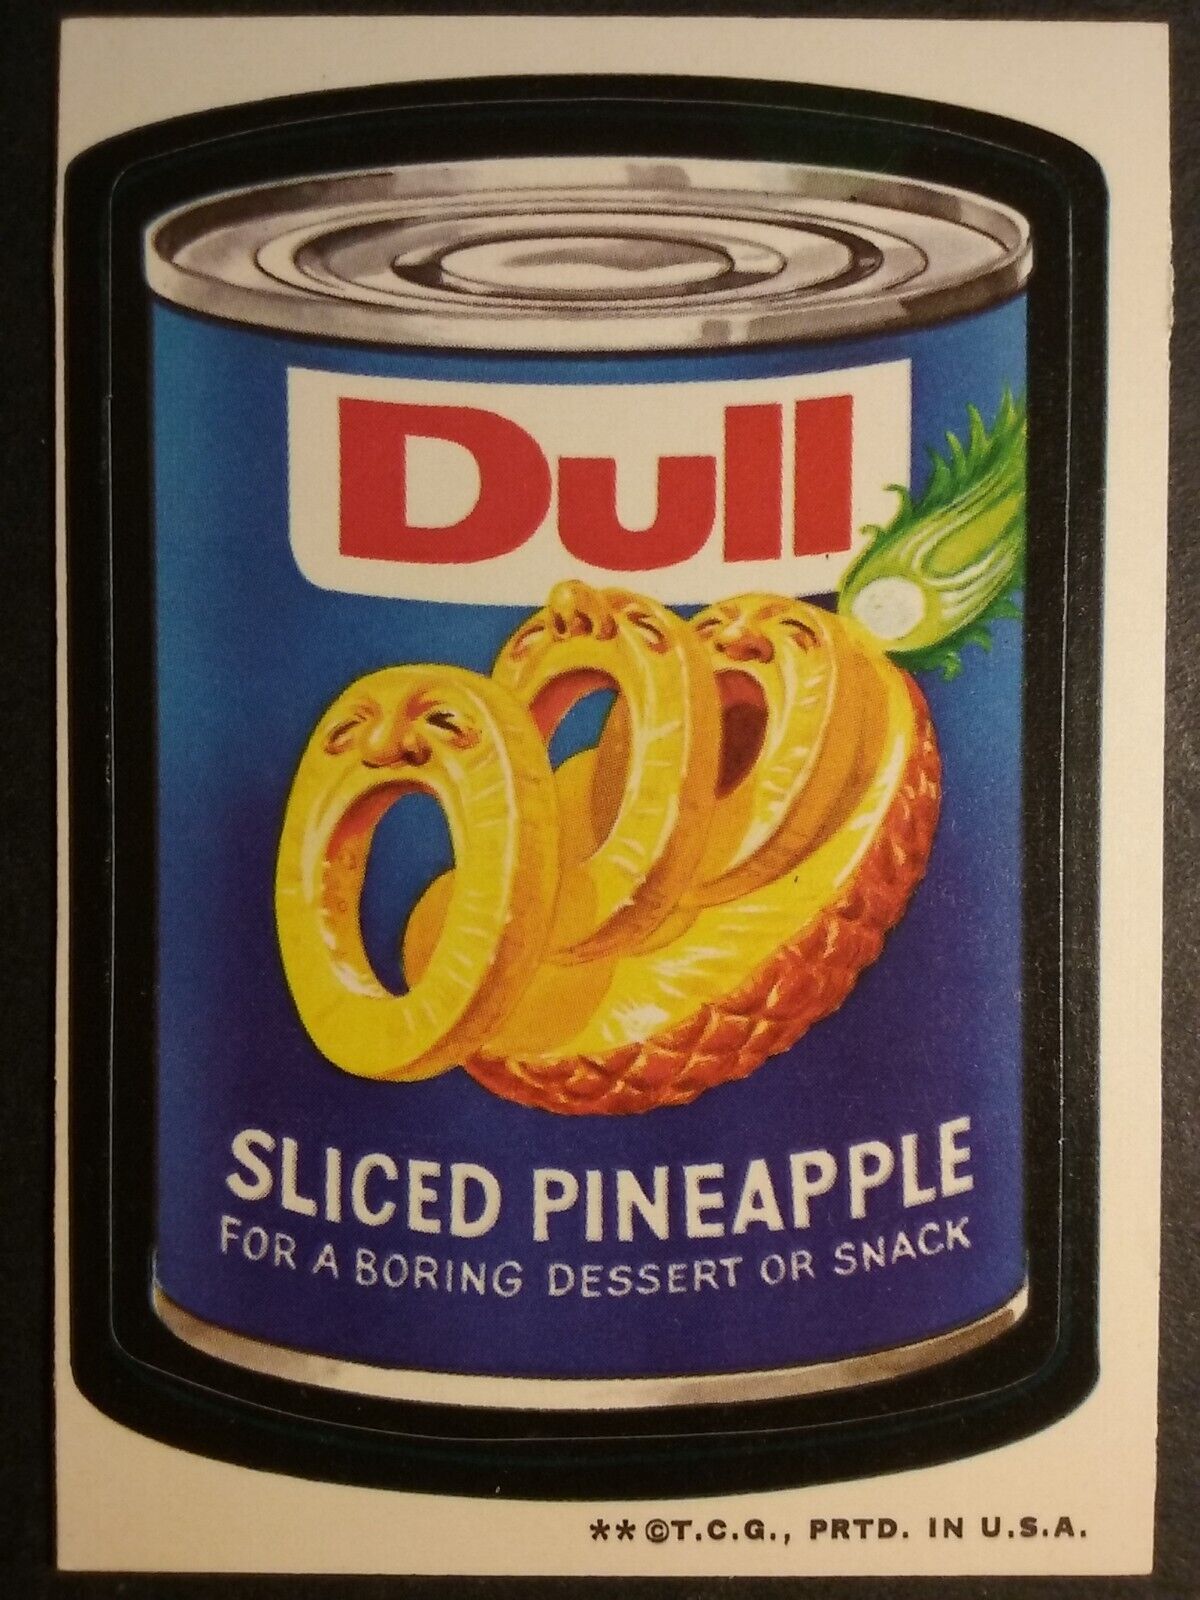 1973 TOPPS WACKY PACKAGES 2ND SERIES DULL PINEAPPLE NEARMINT